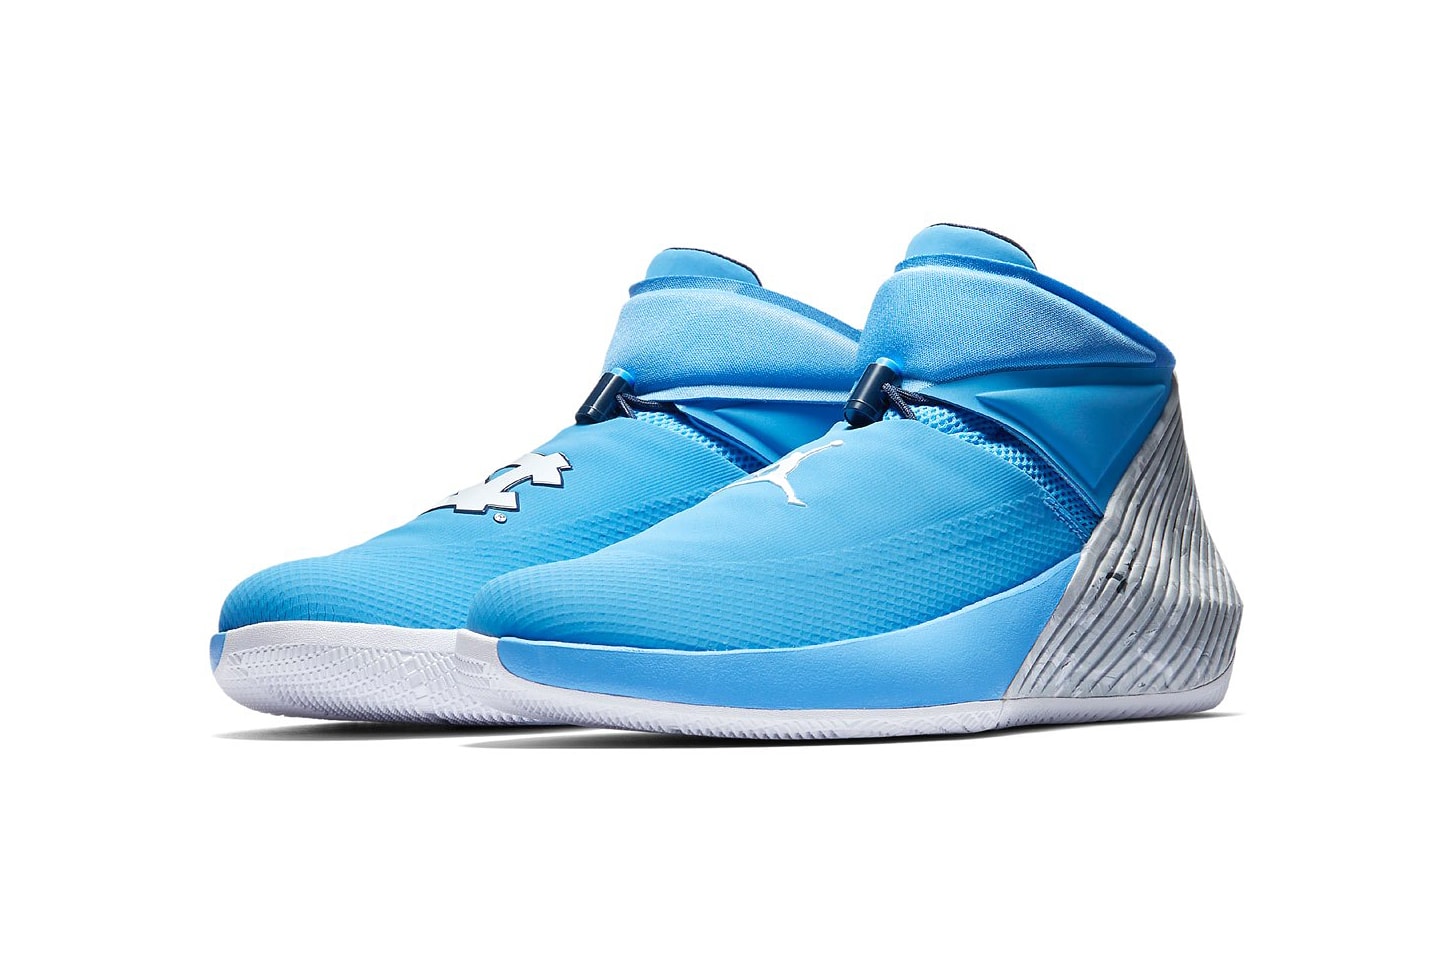 Jordan Why Not Zer01 March Madness pack unc north carolina michigan georgetown 2018 march 9 release date info sneakers shoes footwear russell westbrook